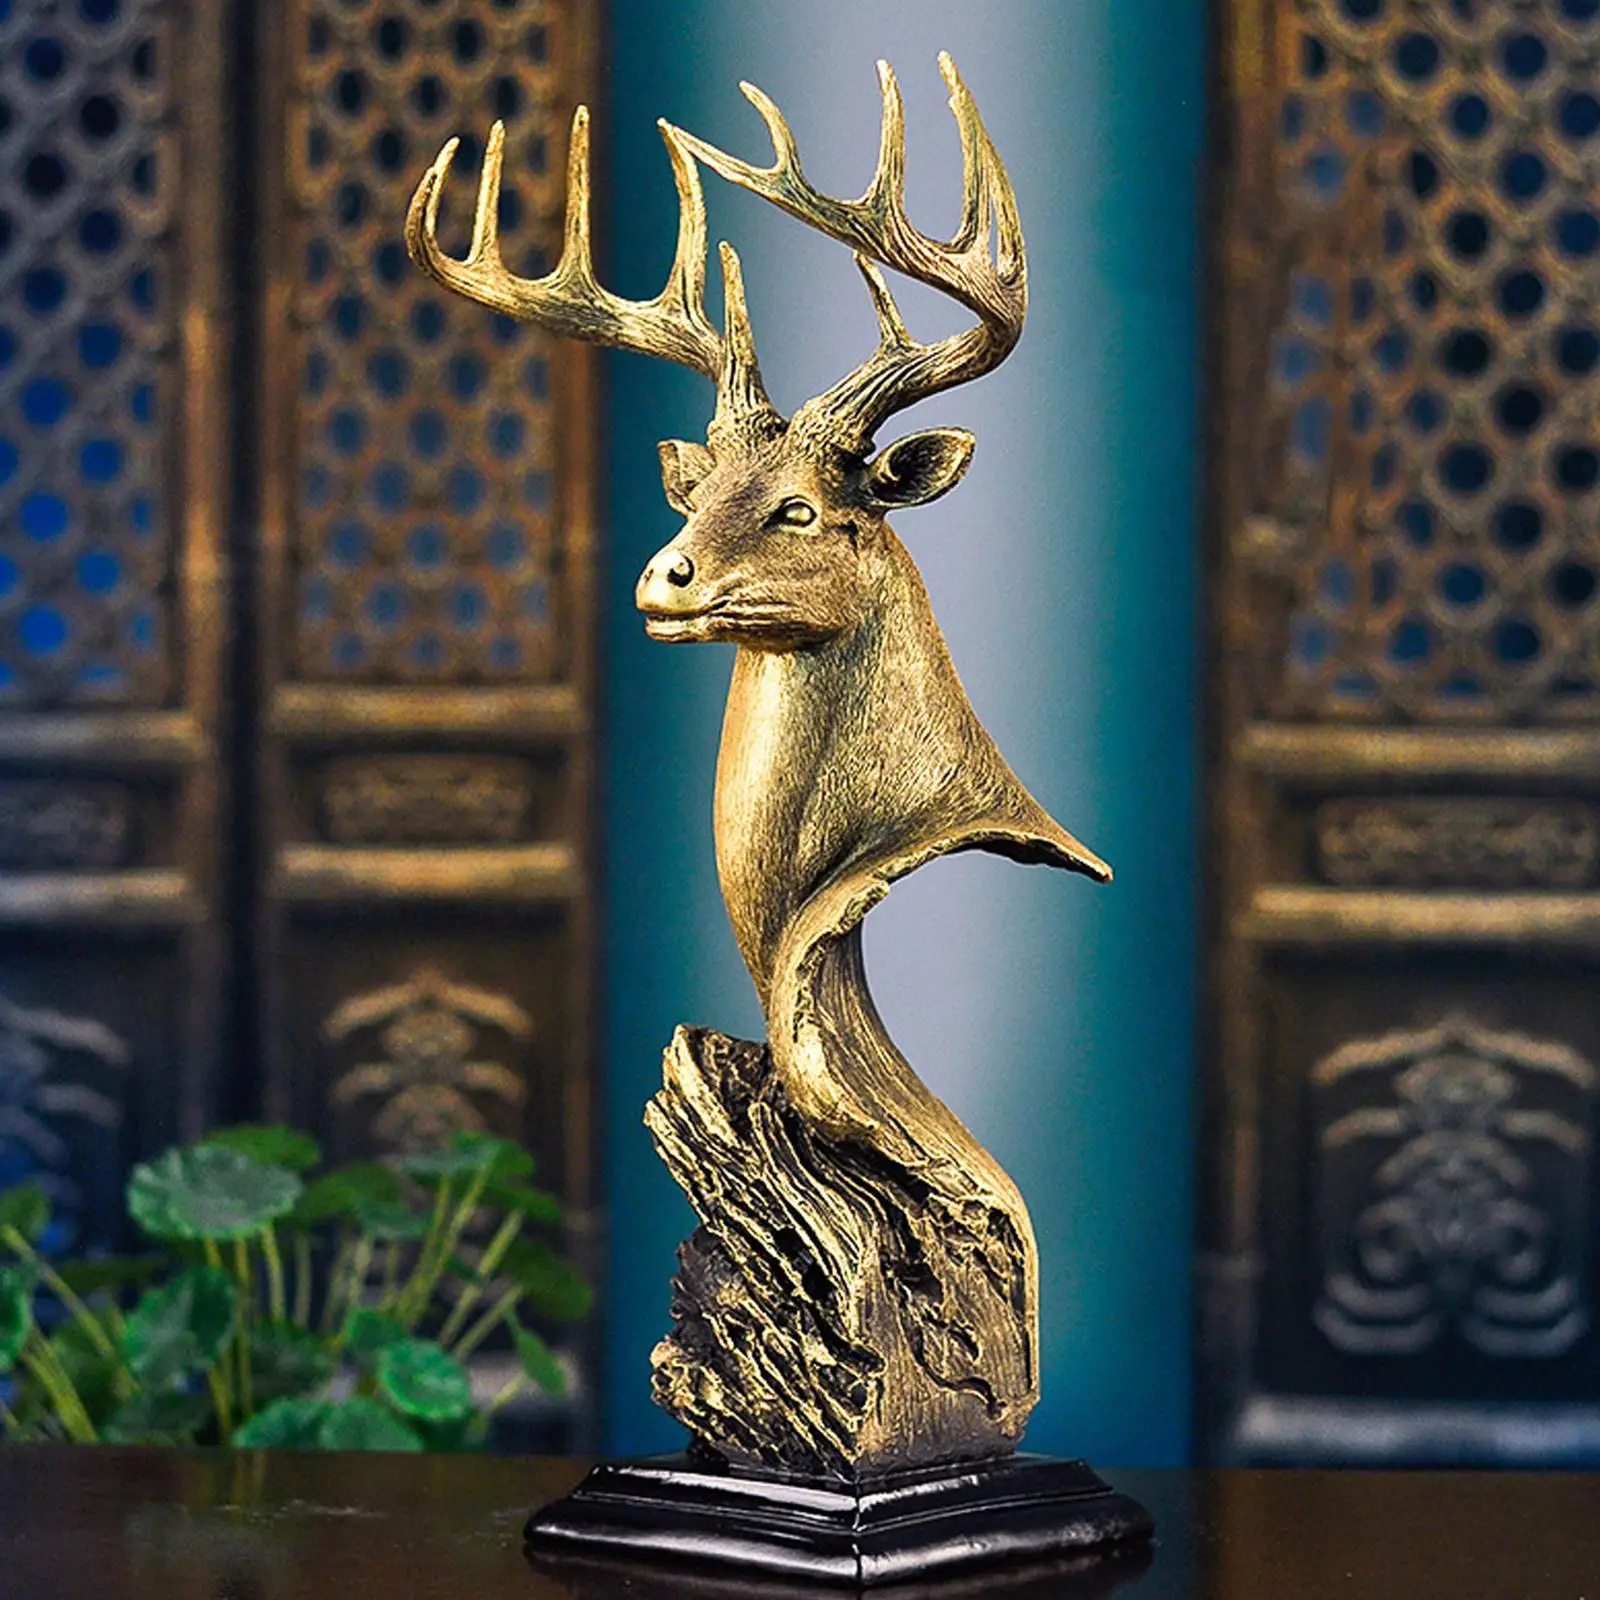 Resin Reindeer Sculptures Shelf Ornaments for Office Study Room Handmade Crafts Accessories Home Furnishing Decorative